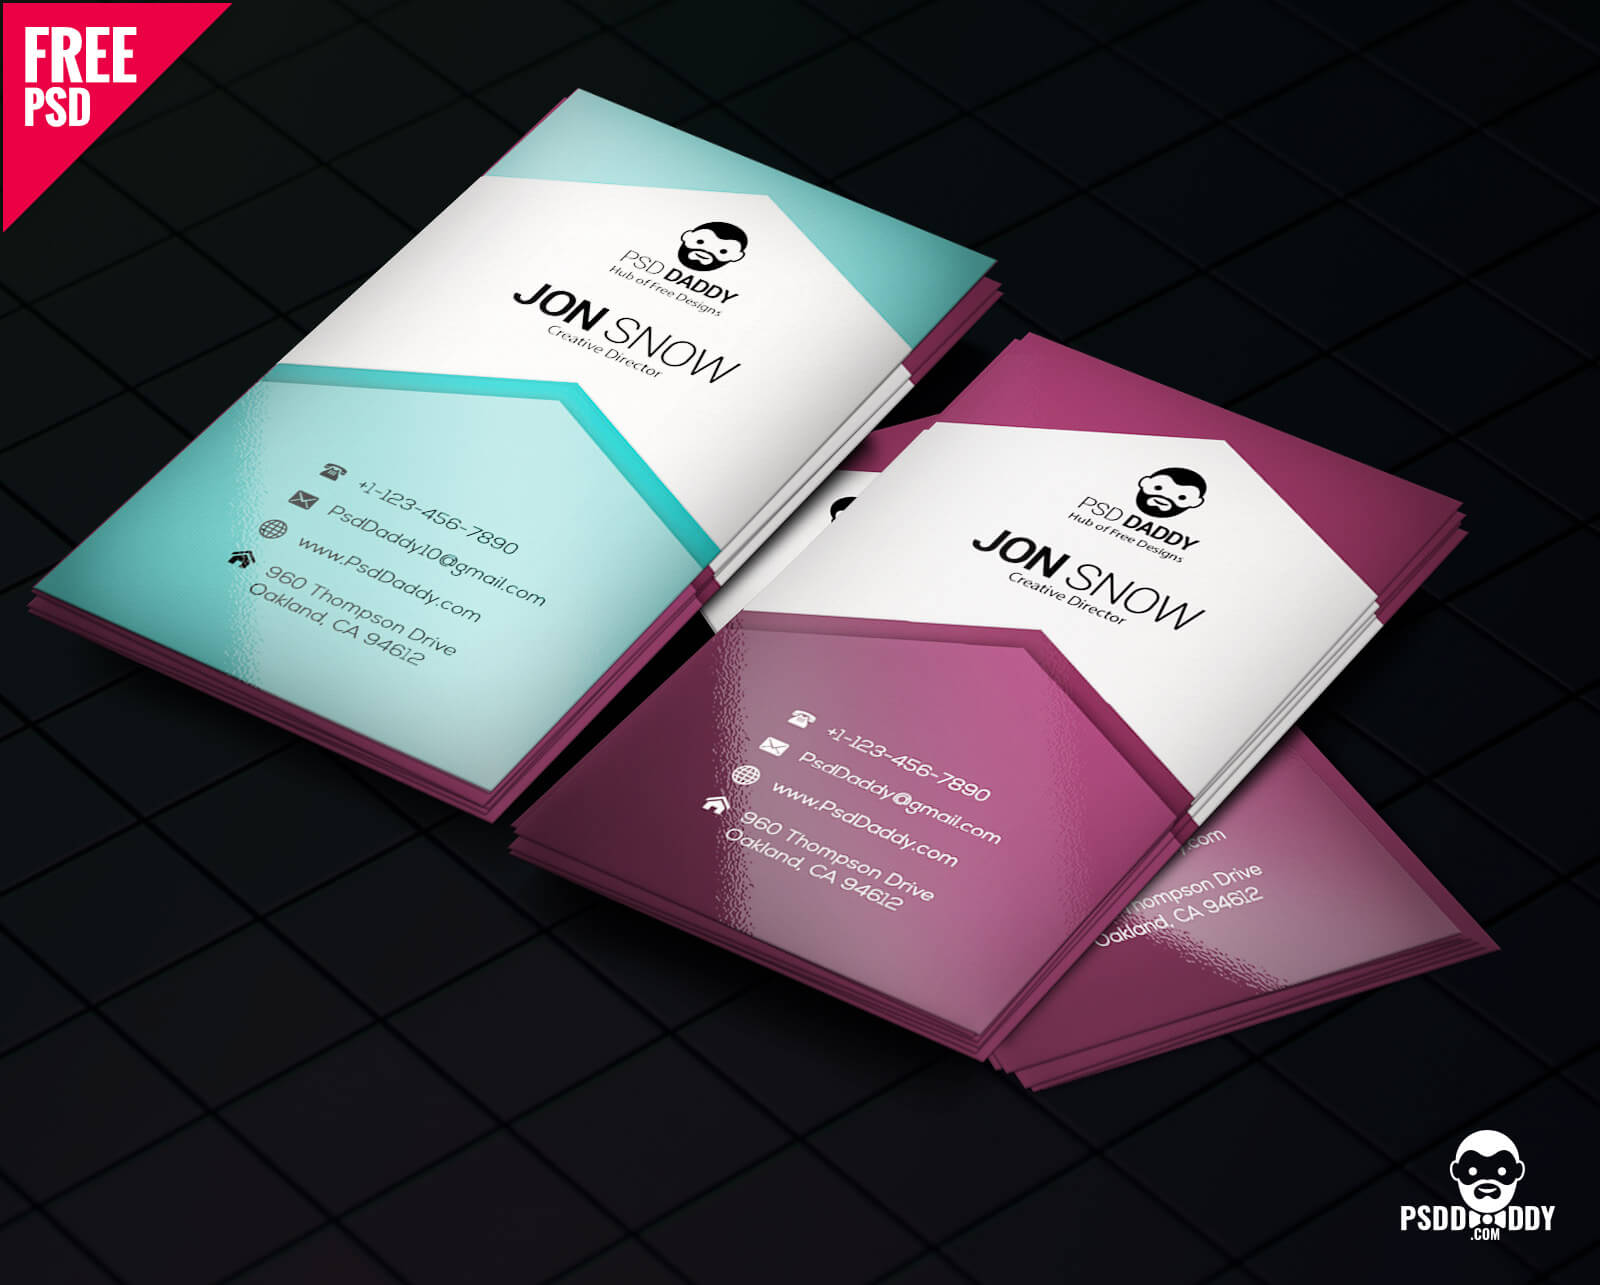 Download]Creative Business Card Psd Free | Psddaddy Regarding Business Card Size Photoshop Template